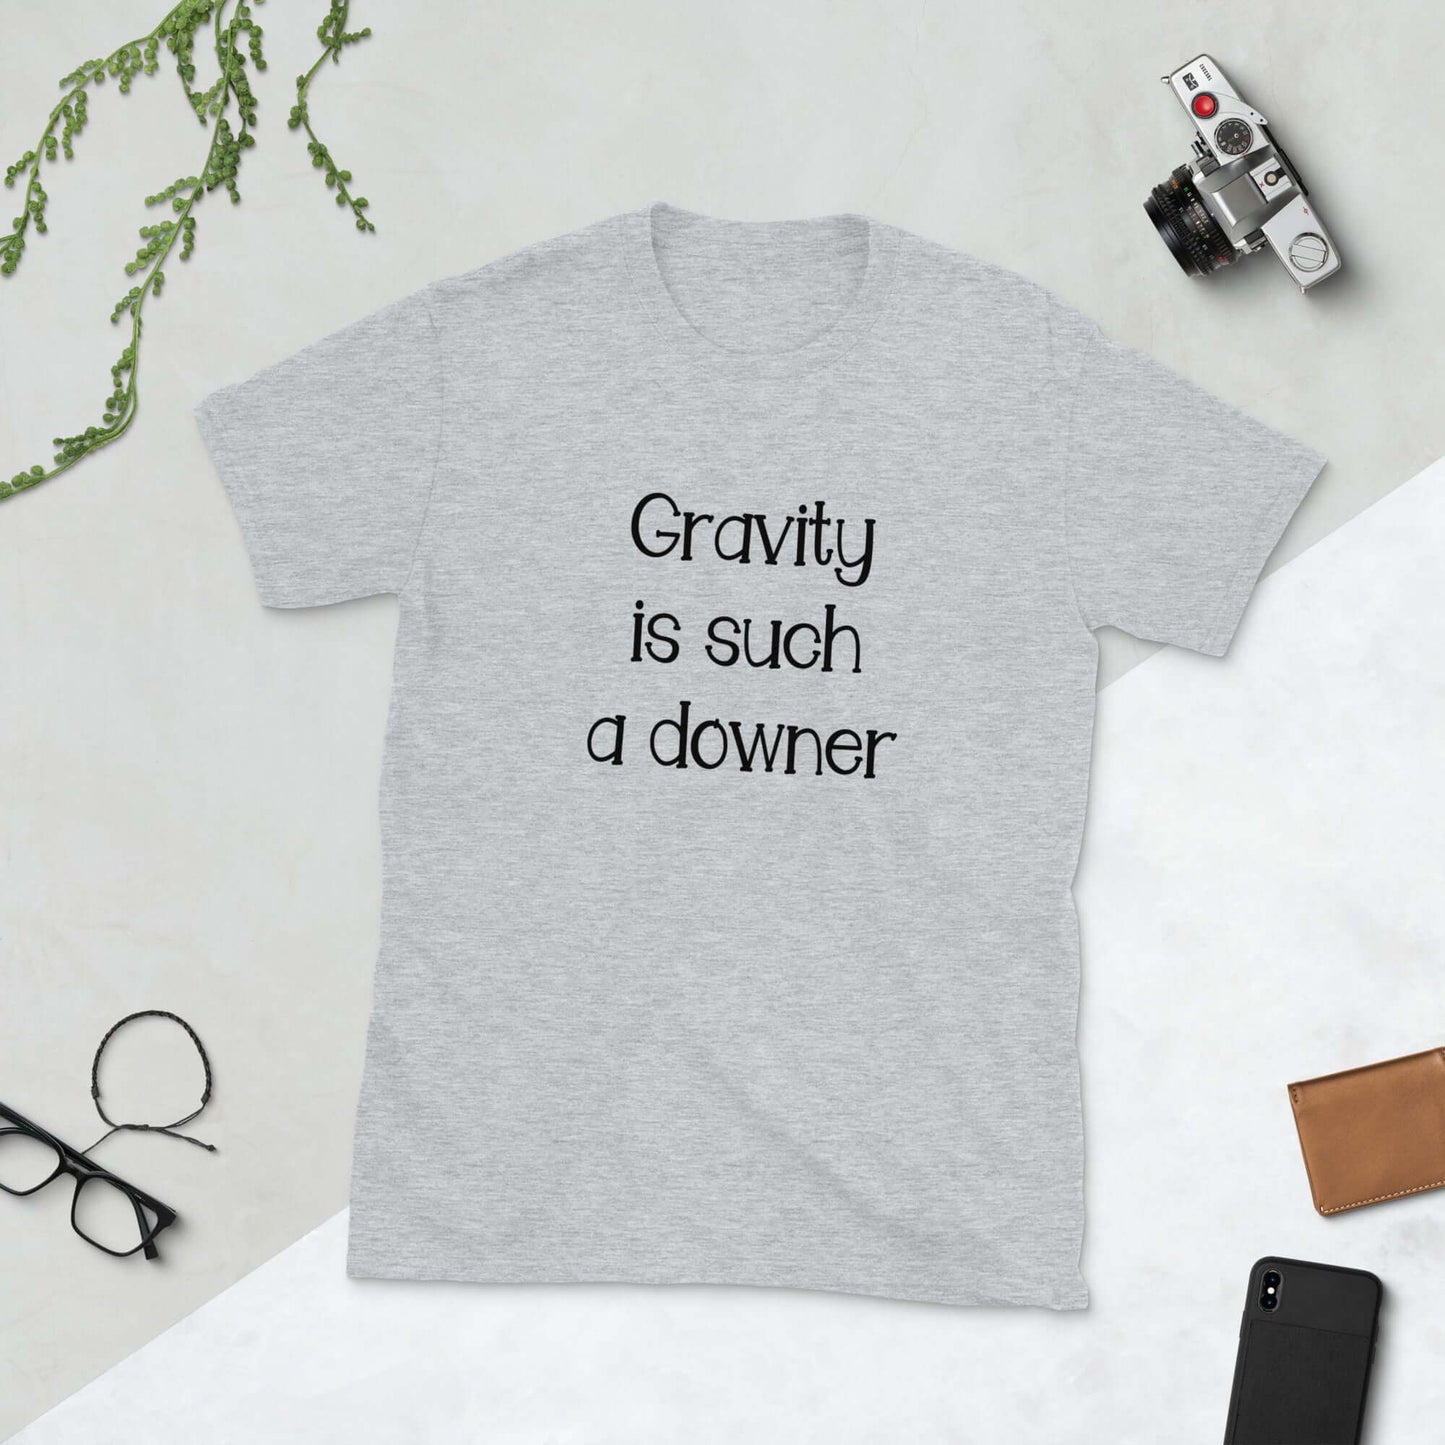 Gravity is such a downer t-shirt